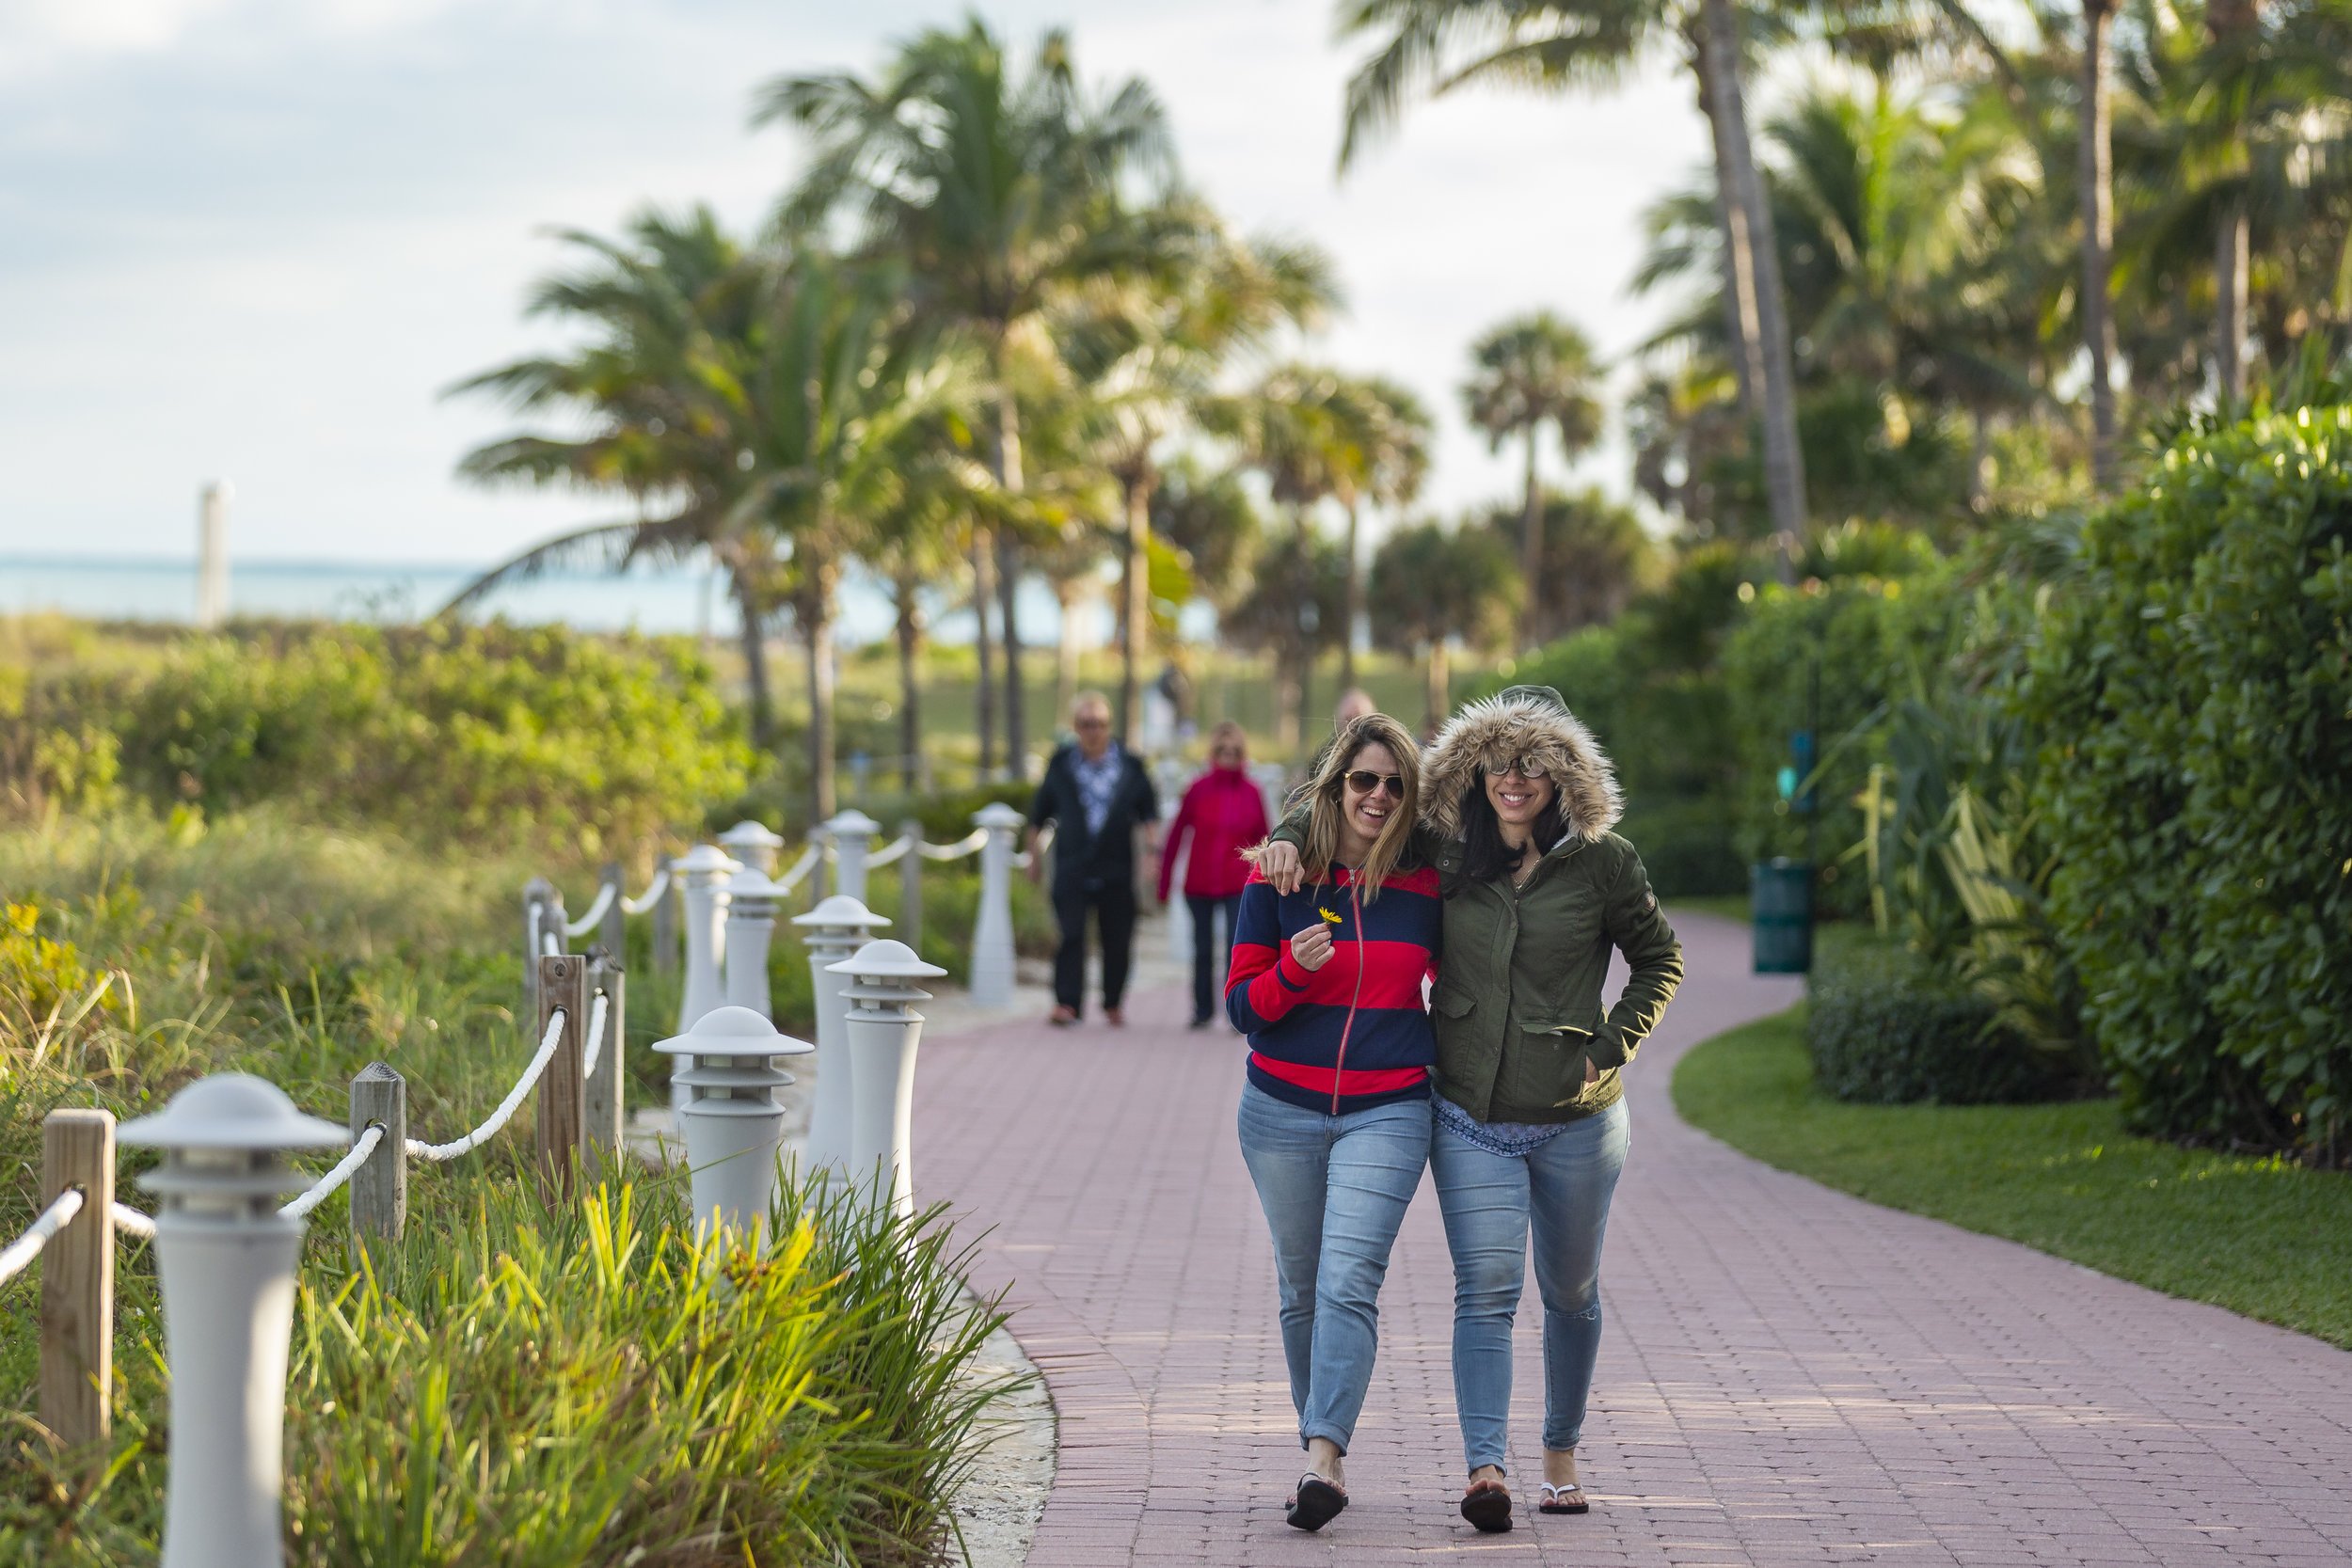  Regina Soares, left, and Rafaela Squiabel, both tourists from Boston, walk down a sidewalk near South Pointe Park Pier in Miami Beach as temperatures drop into the 50s on Monday, Jan. 28, 2019. 